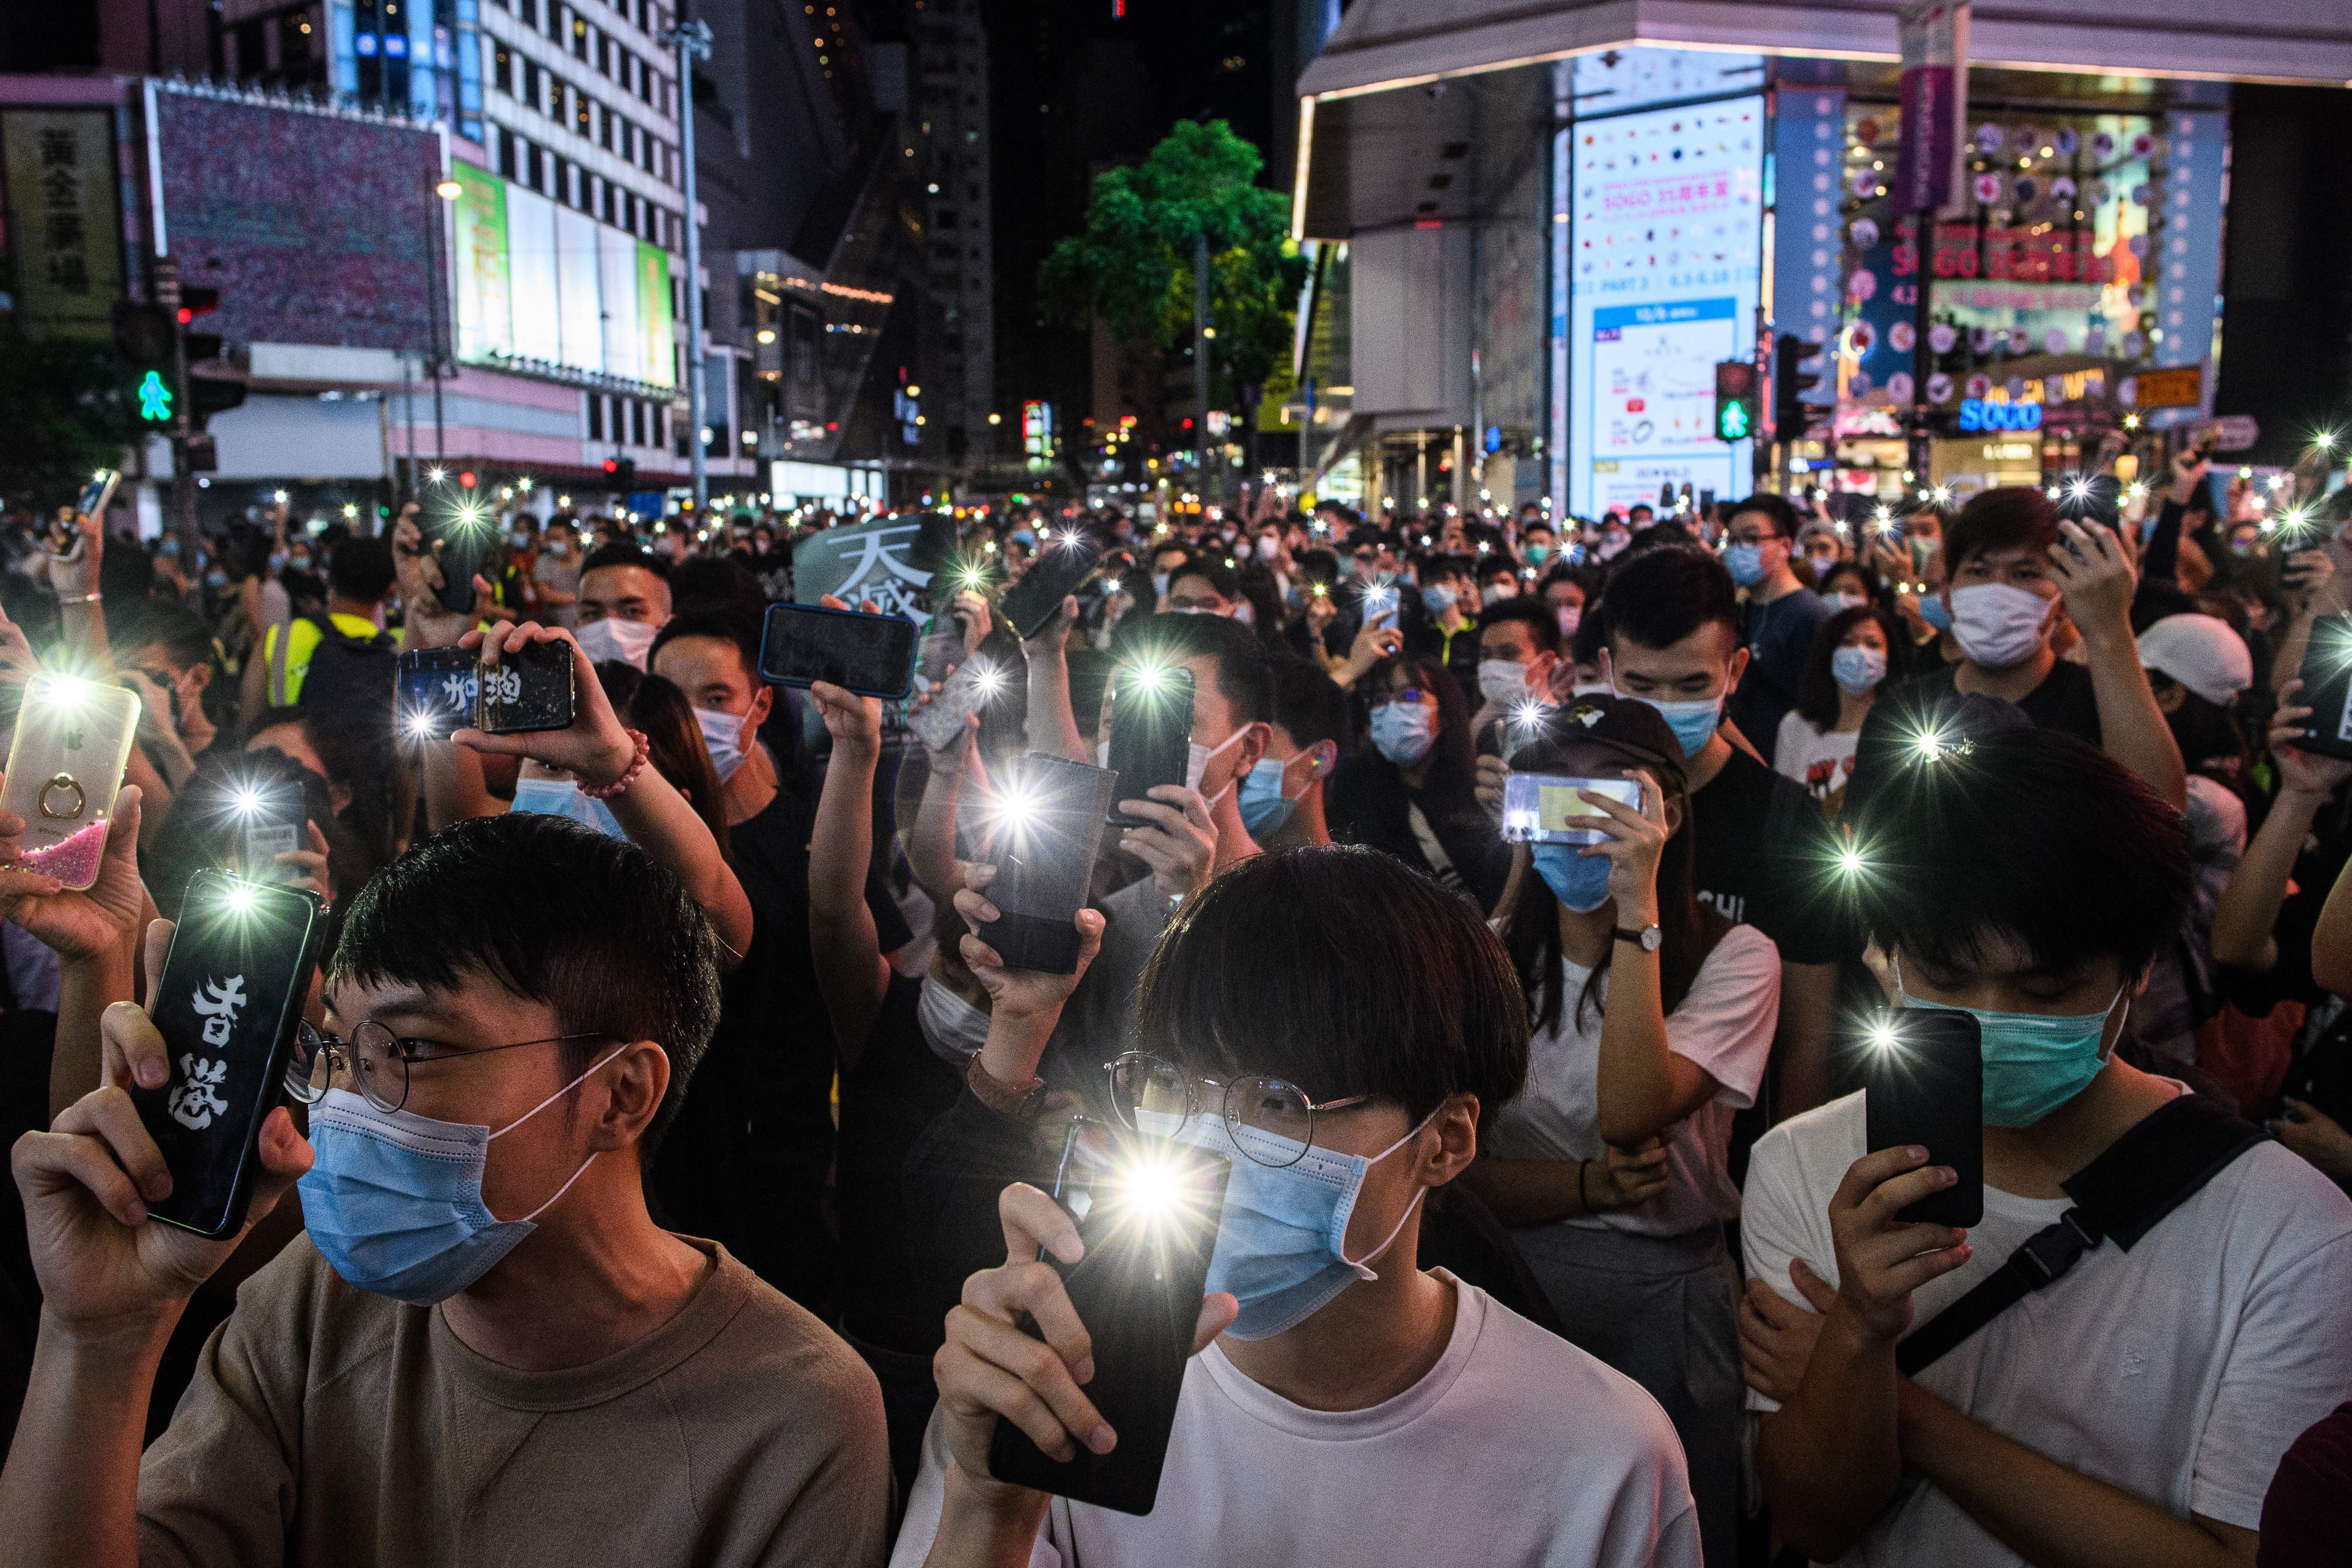 A large group of people stand in a city street at night, holding up phones with the flashlights turned on.